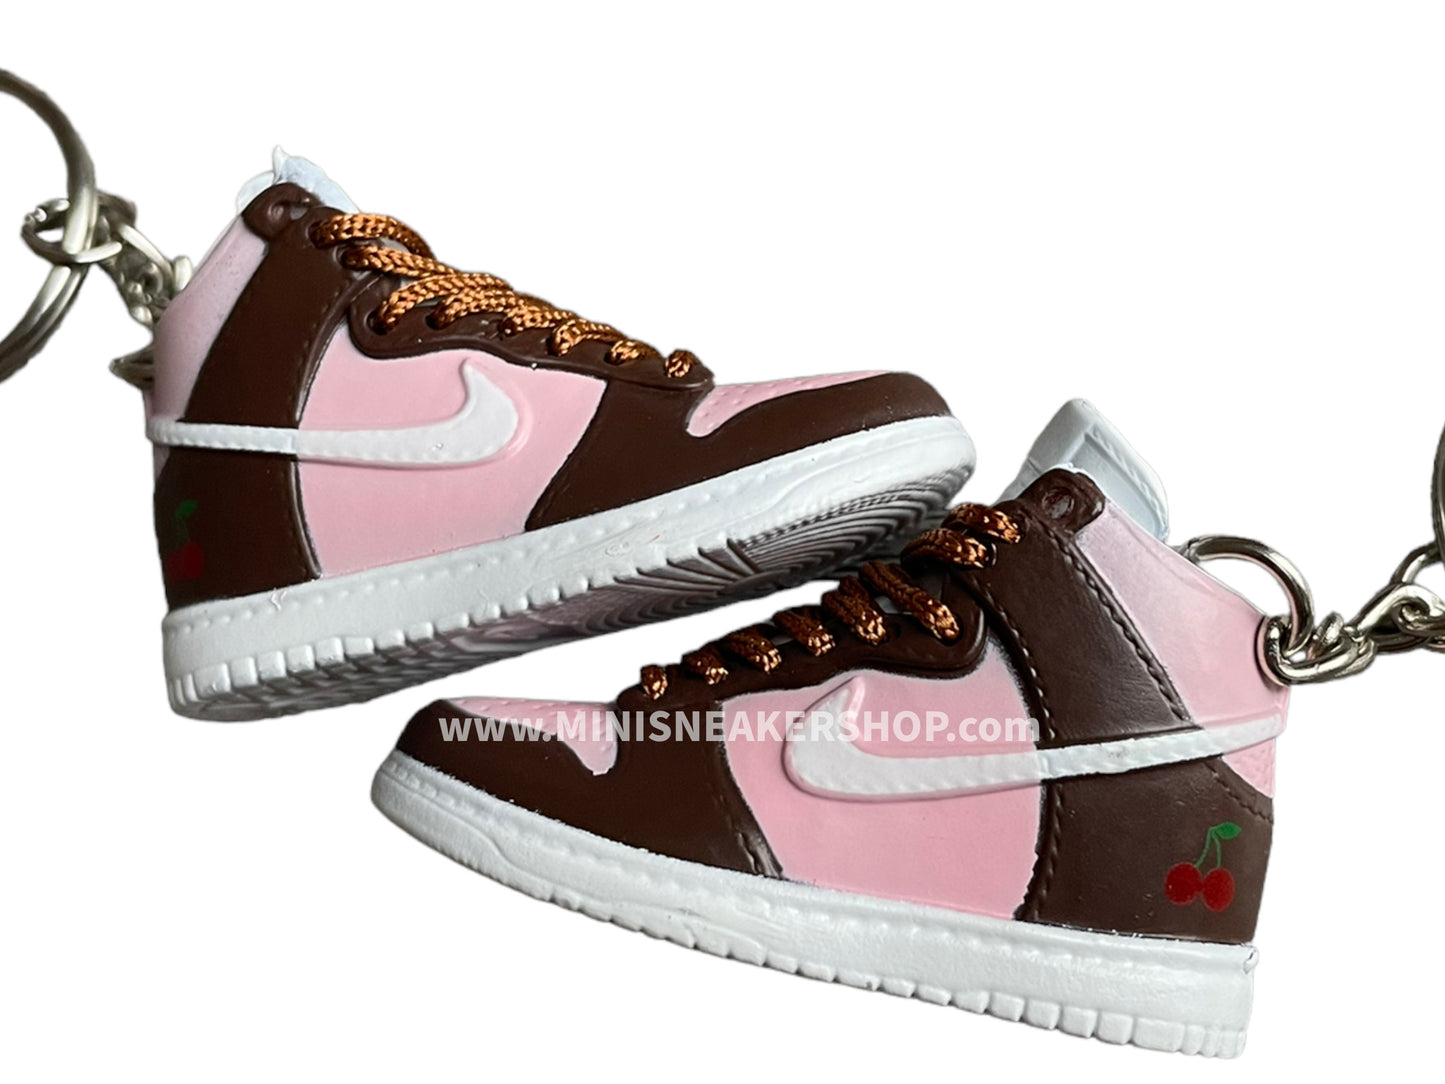 Mini sneaker keychain 3D Dunk - Brown and Pink